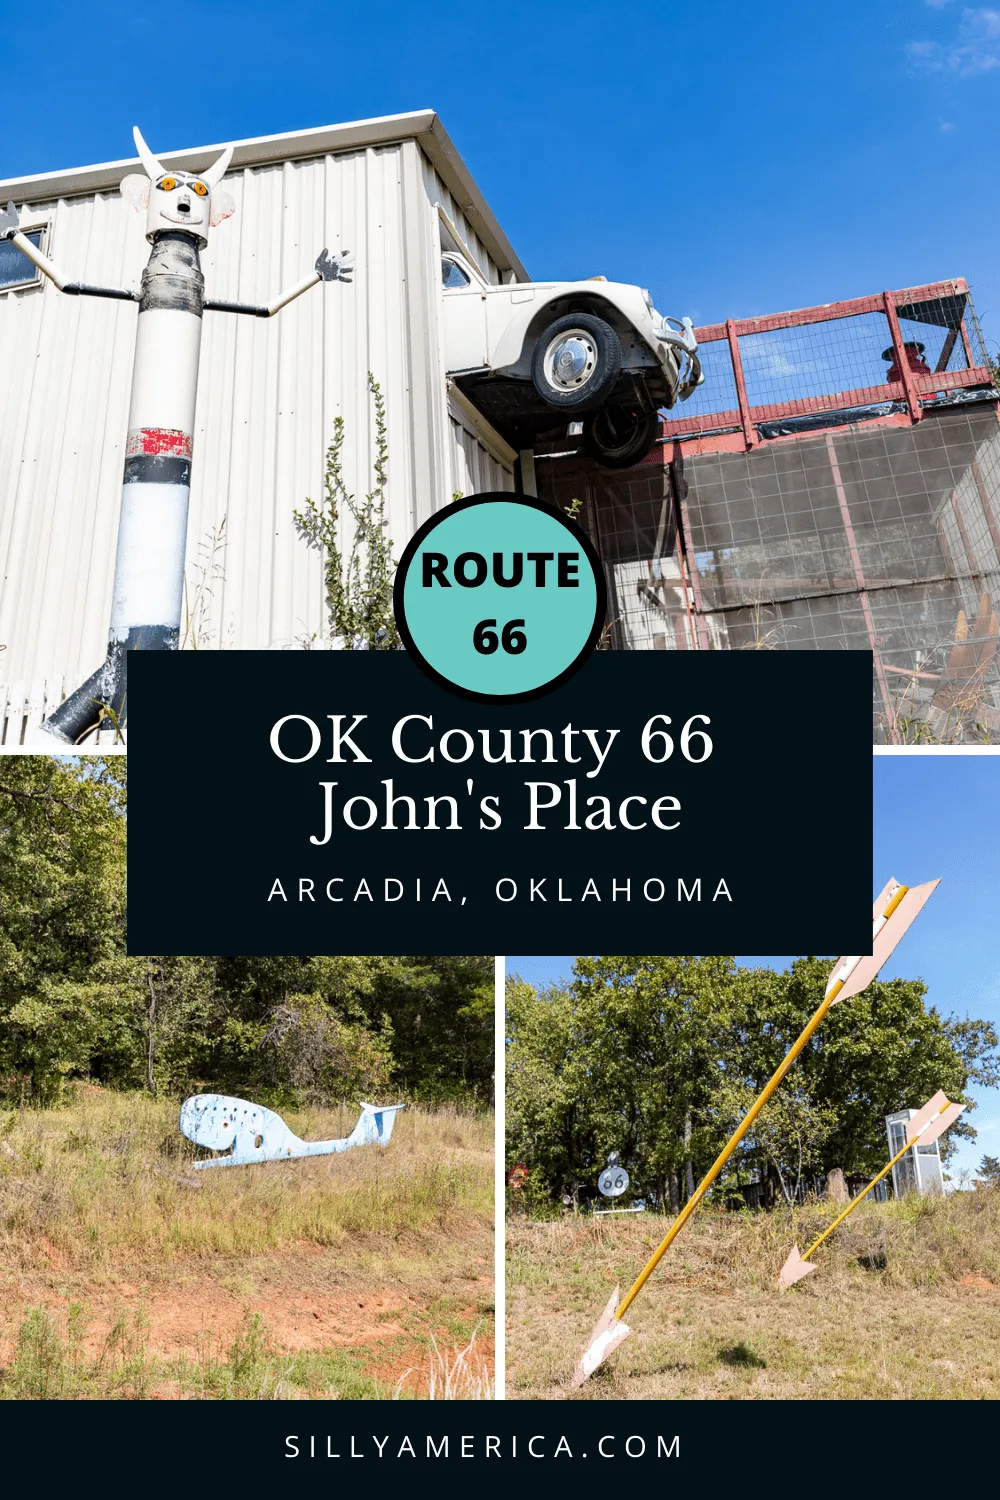 Find the best of Route 66 in one backyard. At this Oklahoma roadside attraction you’ll find all the best of the Mother Road without having to bother with a long drive. OK County 66, or John’s Place, in Arcadia, Oklahoma is one man’s vision and homage to the Main Street of America.   #RoadTrips #RoadTripStop #Route66 #Route66RoadTrip #OklahomaRoute66 #Oklahoma #OklahomaRoadTrip #OklahomaRoadsideAttractions #RoadsideAttractions #RoadsideAttraction #RoadsideAmerica #RoadTrip